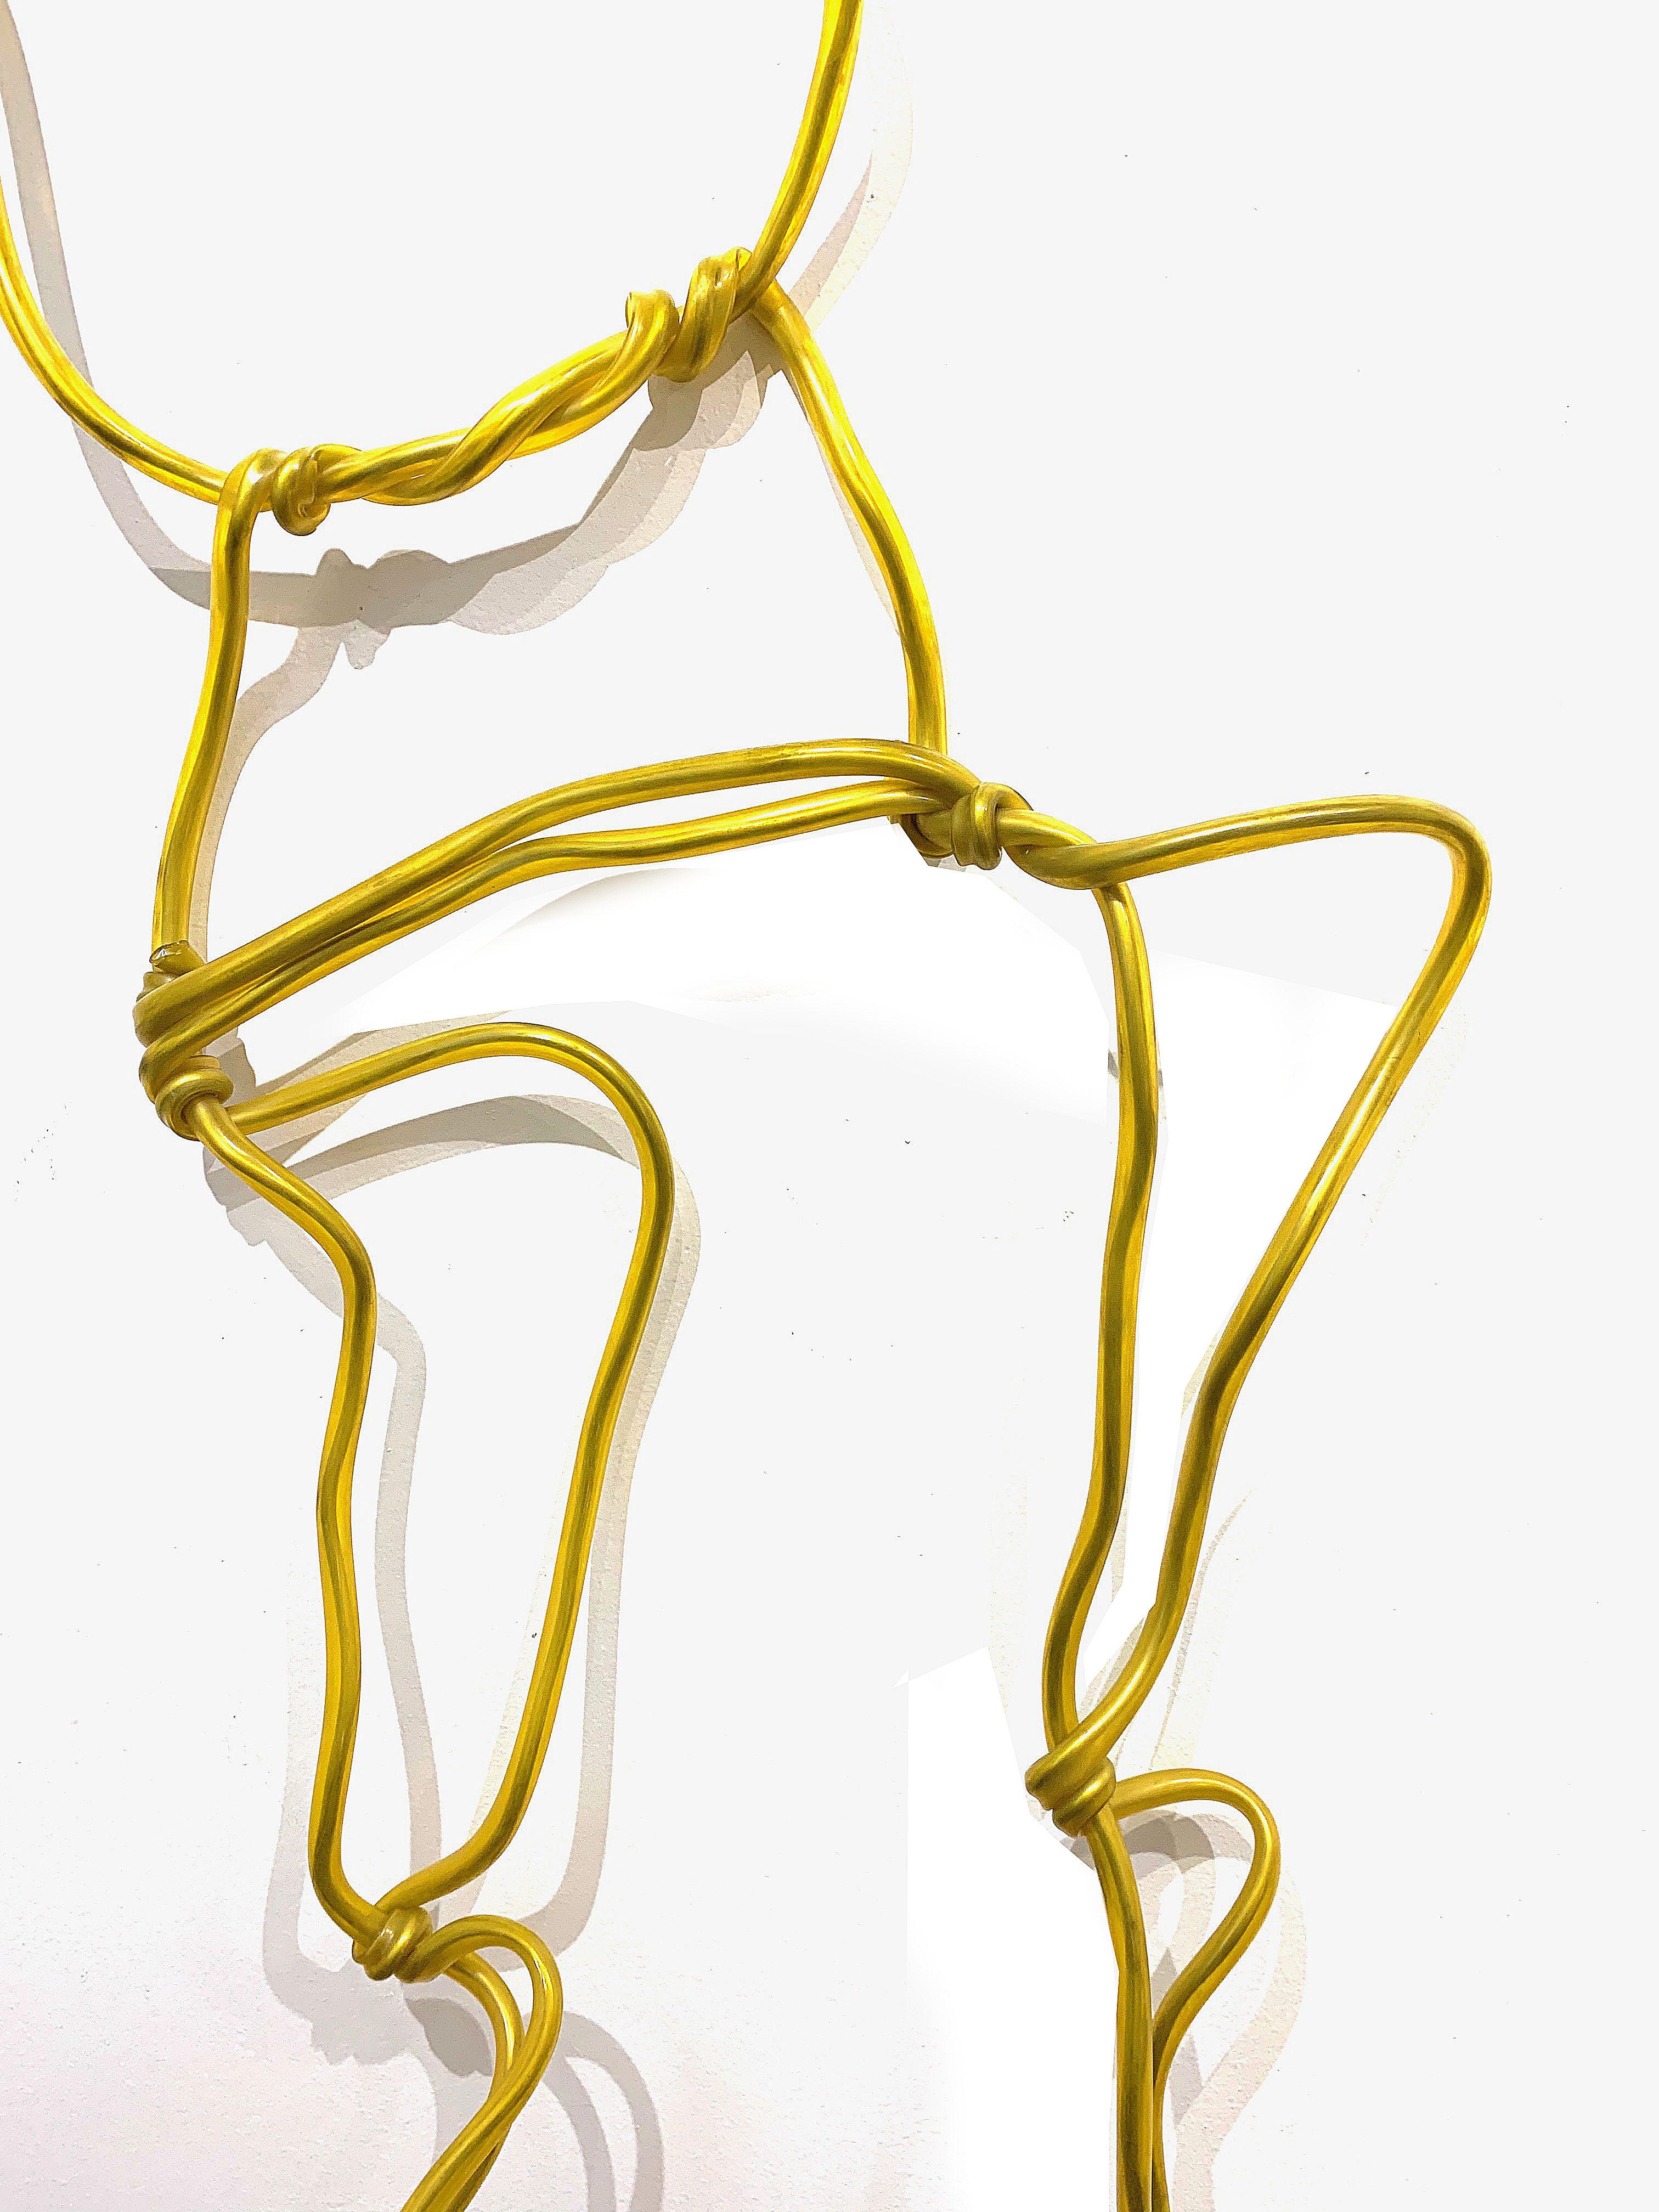 Sculpture made of yellow plastic tubing and aluminum. This figurative piece can be placed in various poses, including displaying on a wall or in a hand stand. Dimensions given are approximate, as the overall height and width depends on how the